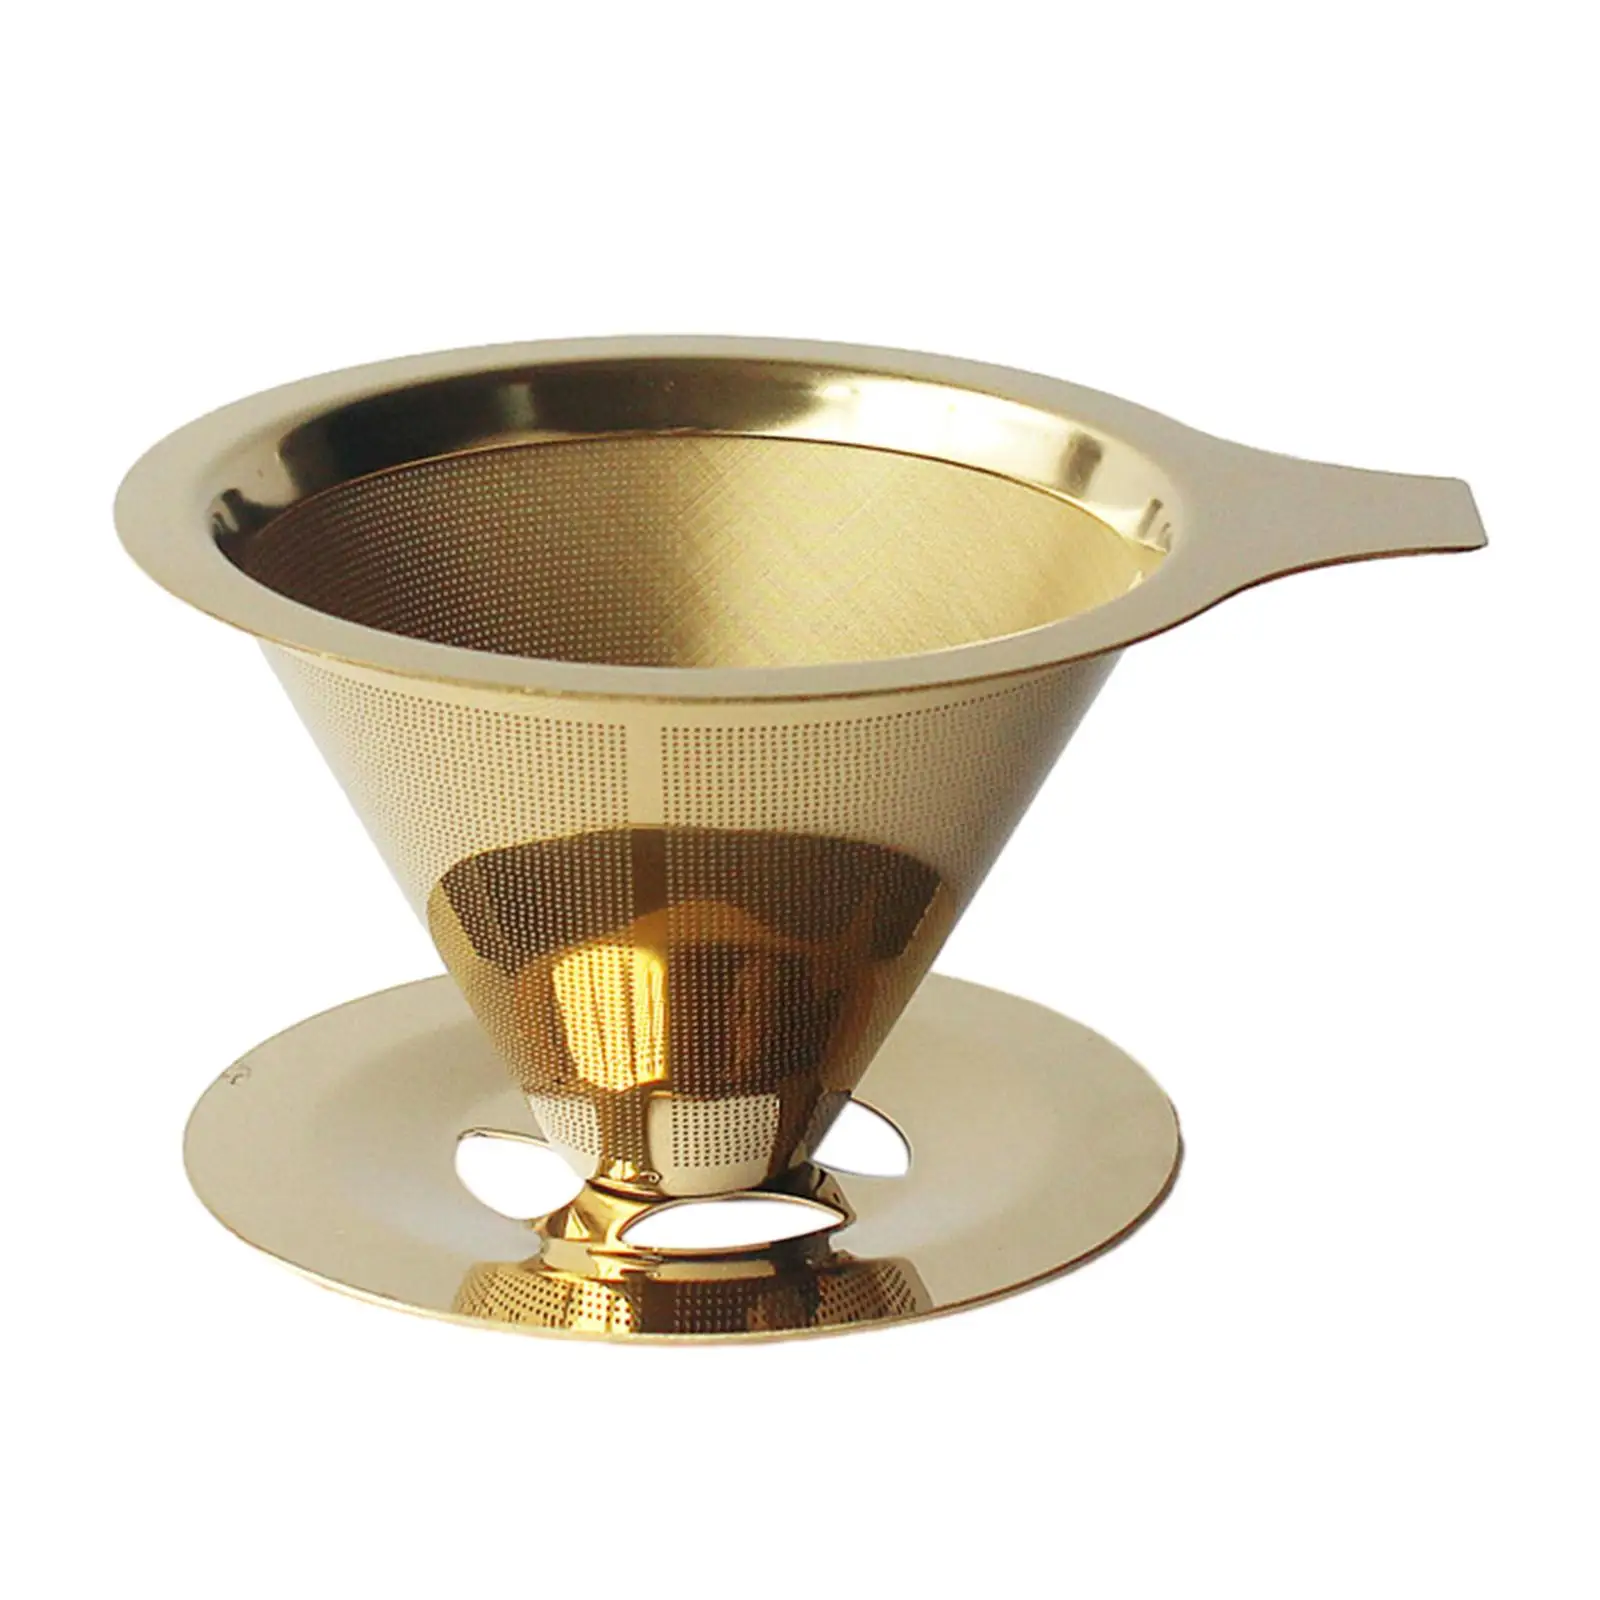 Stainless Steel Coffee Filter Pour over Coffee for Restaurant Travel Camping